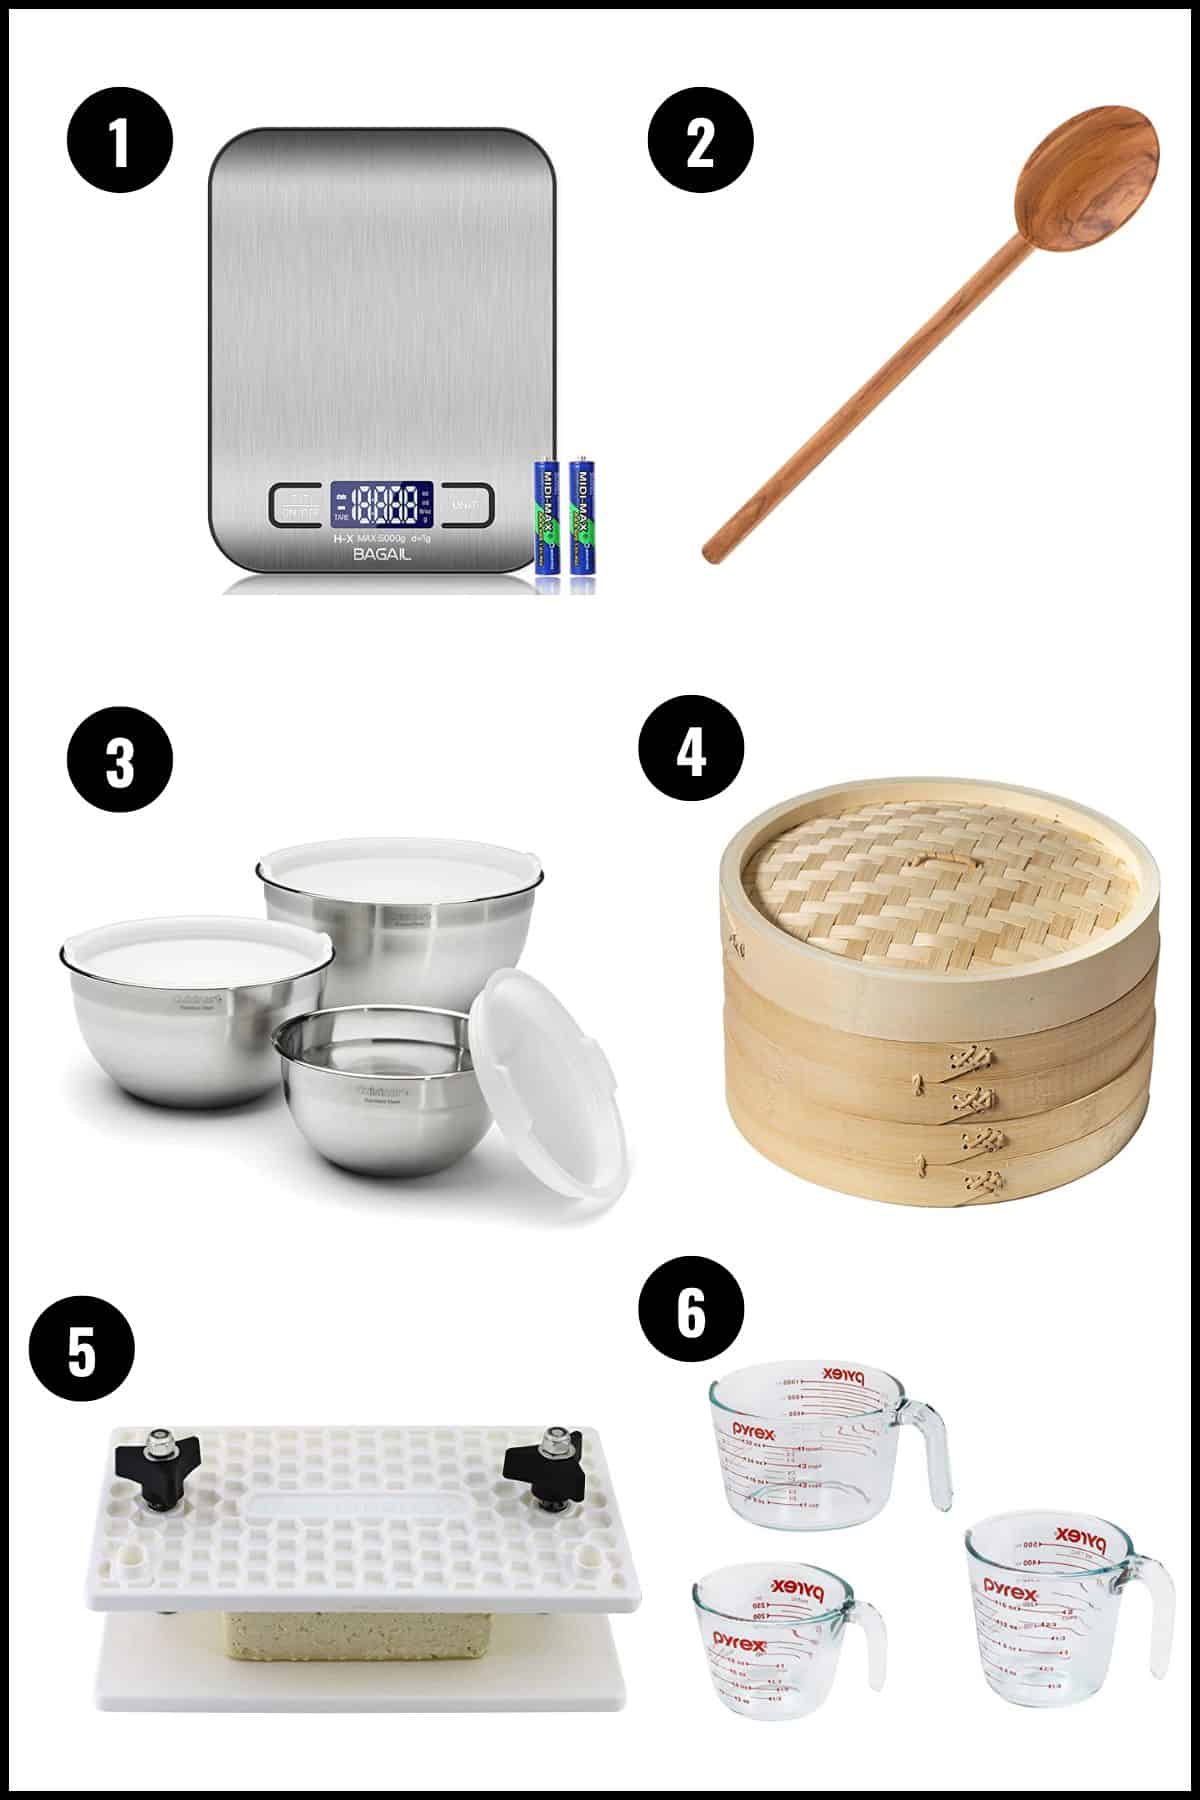 Graphic showing kitchen tools with associated numbers.